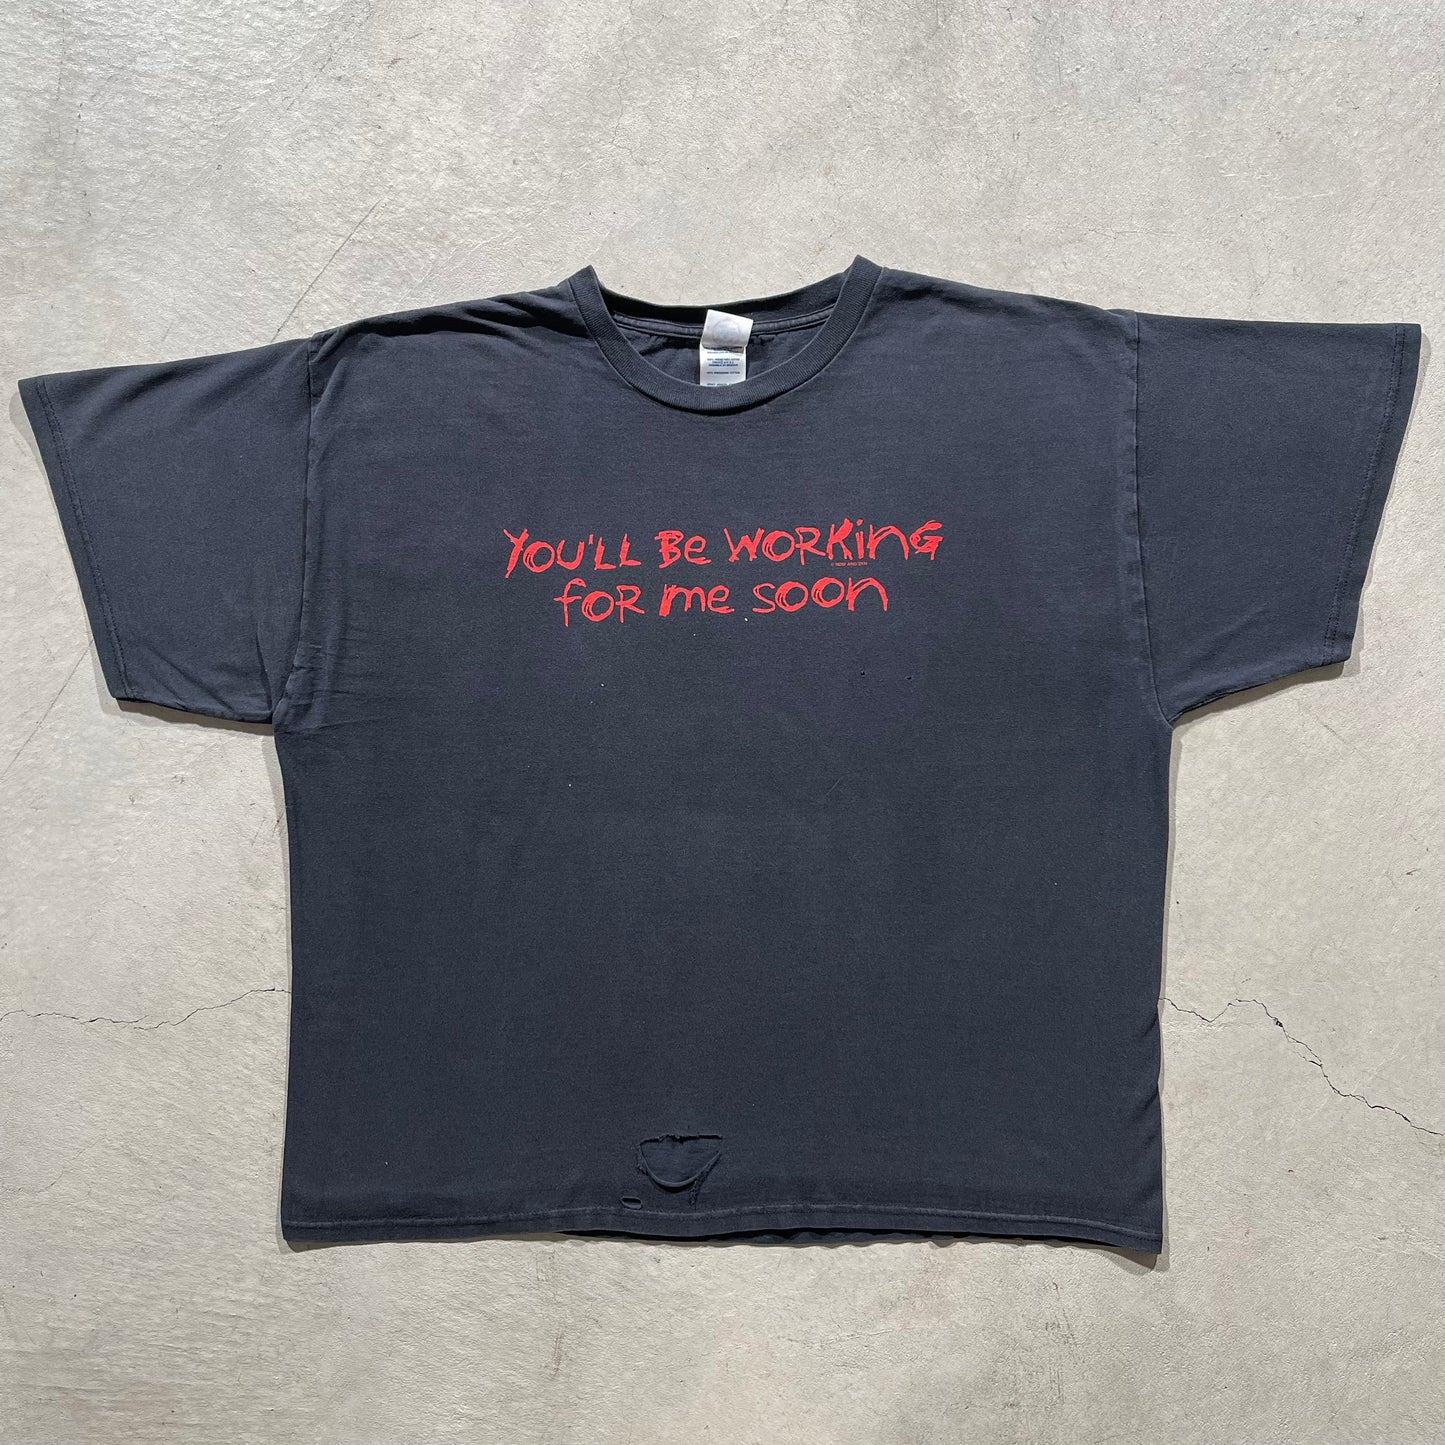 00s 'You'll Be Working For Me Soon' Tee- XXL